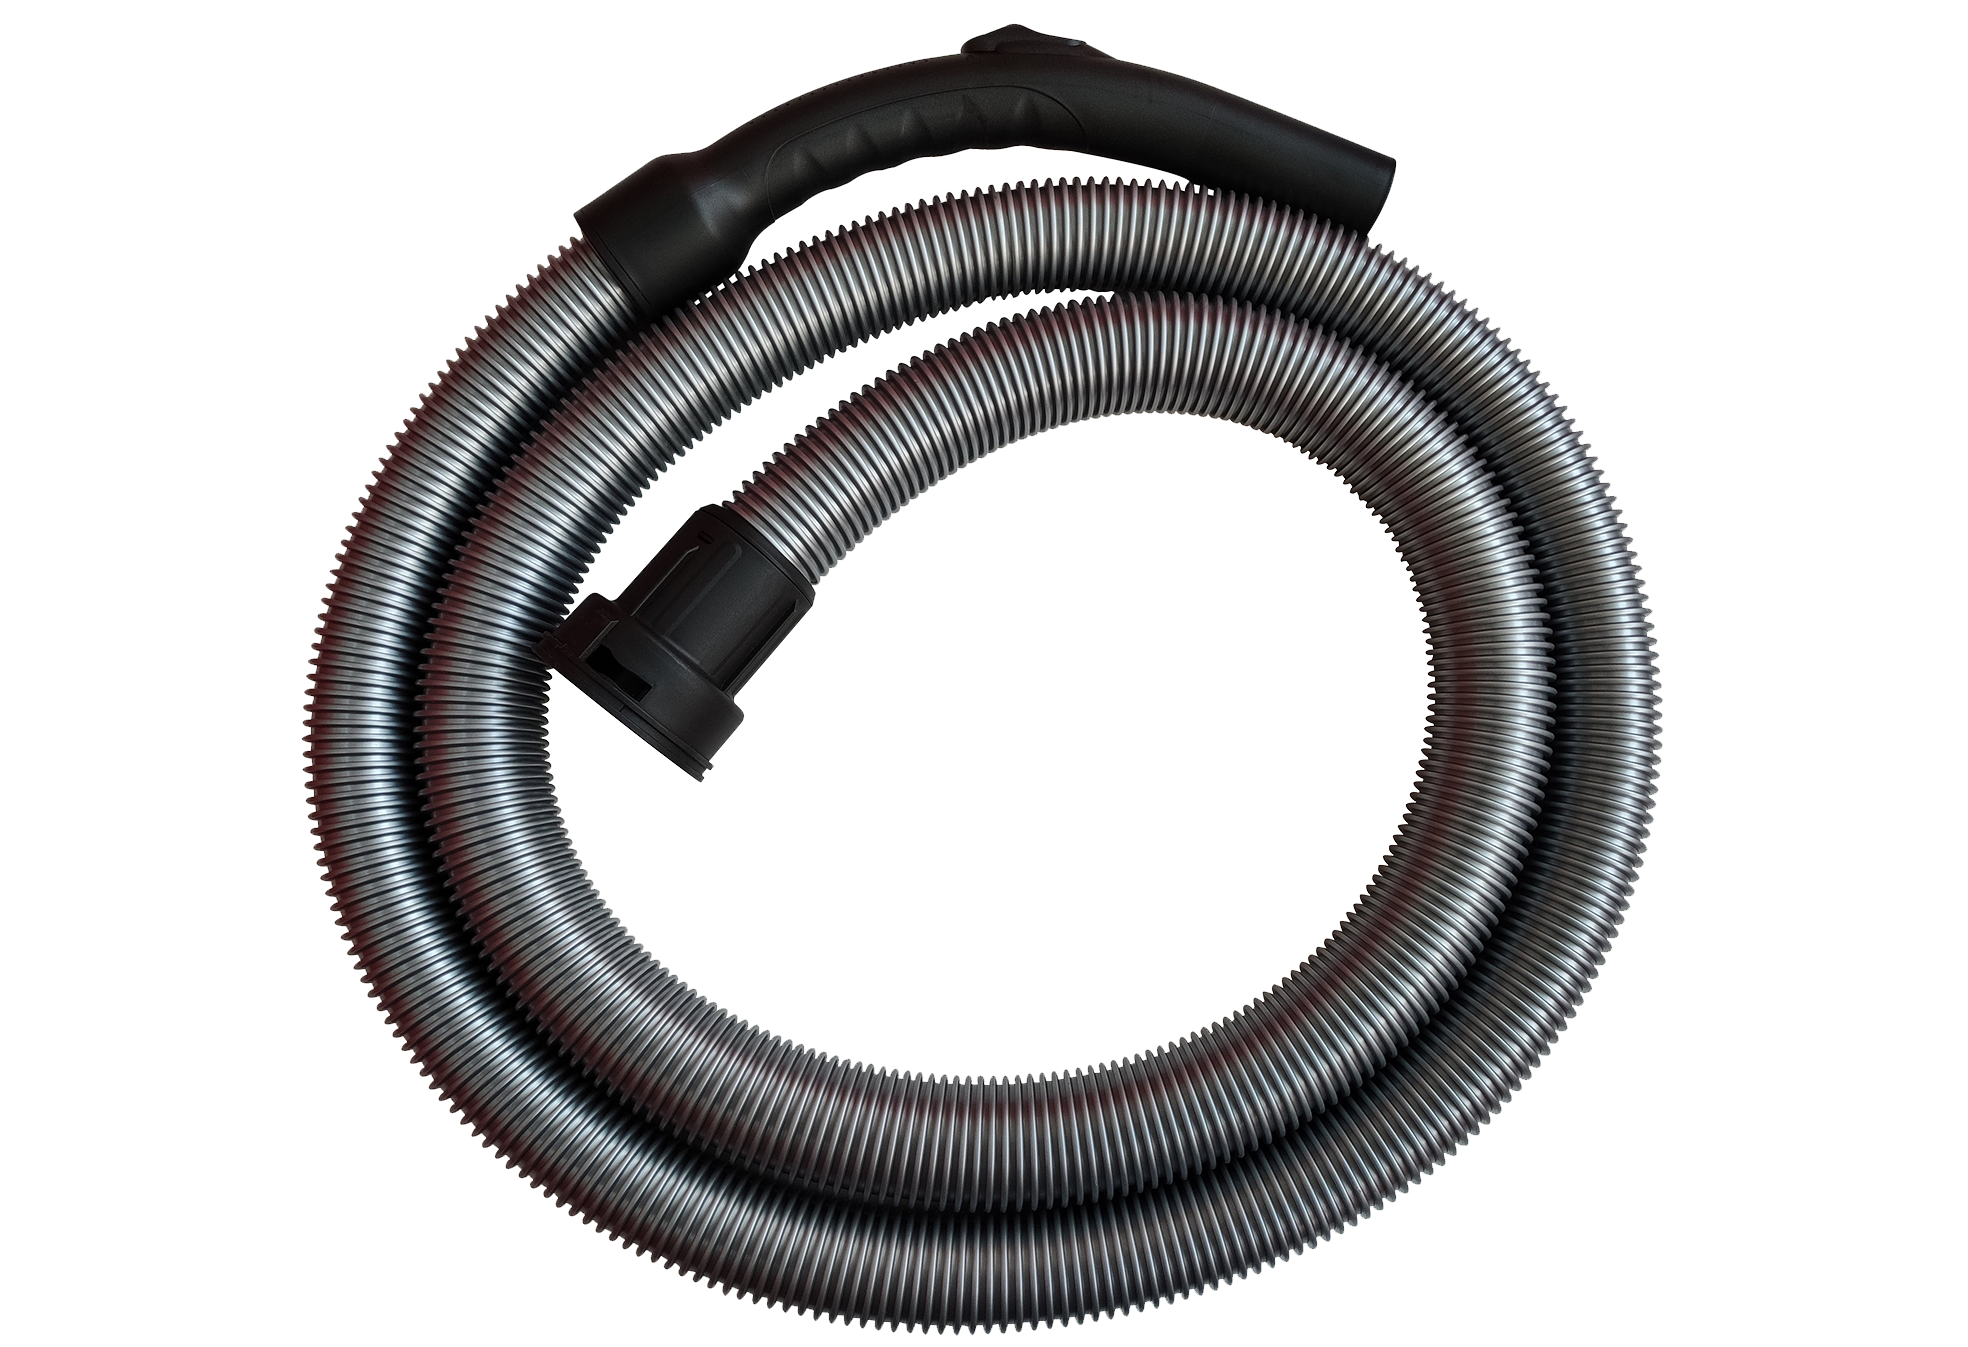 Suction hose 32-320 with curved handle tube and secondary slide valve